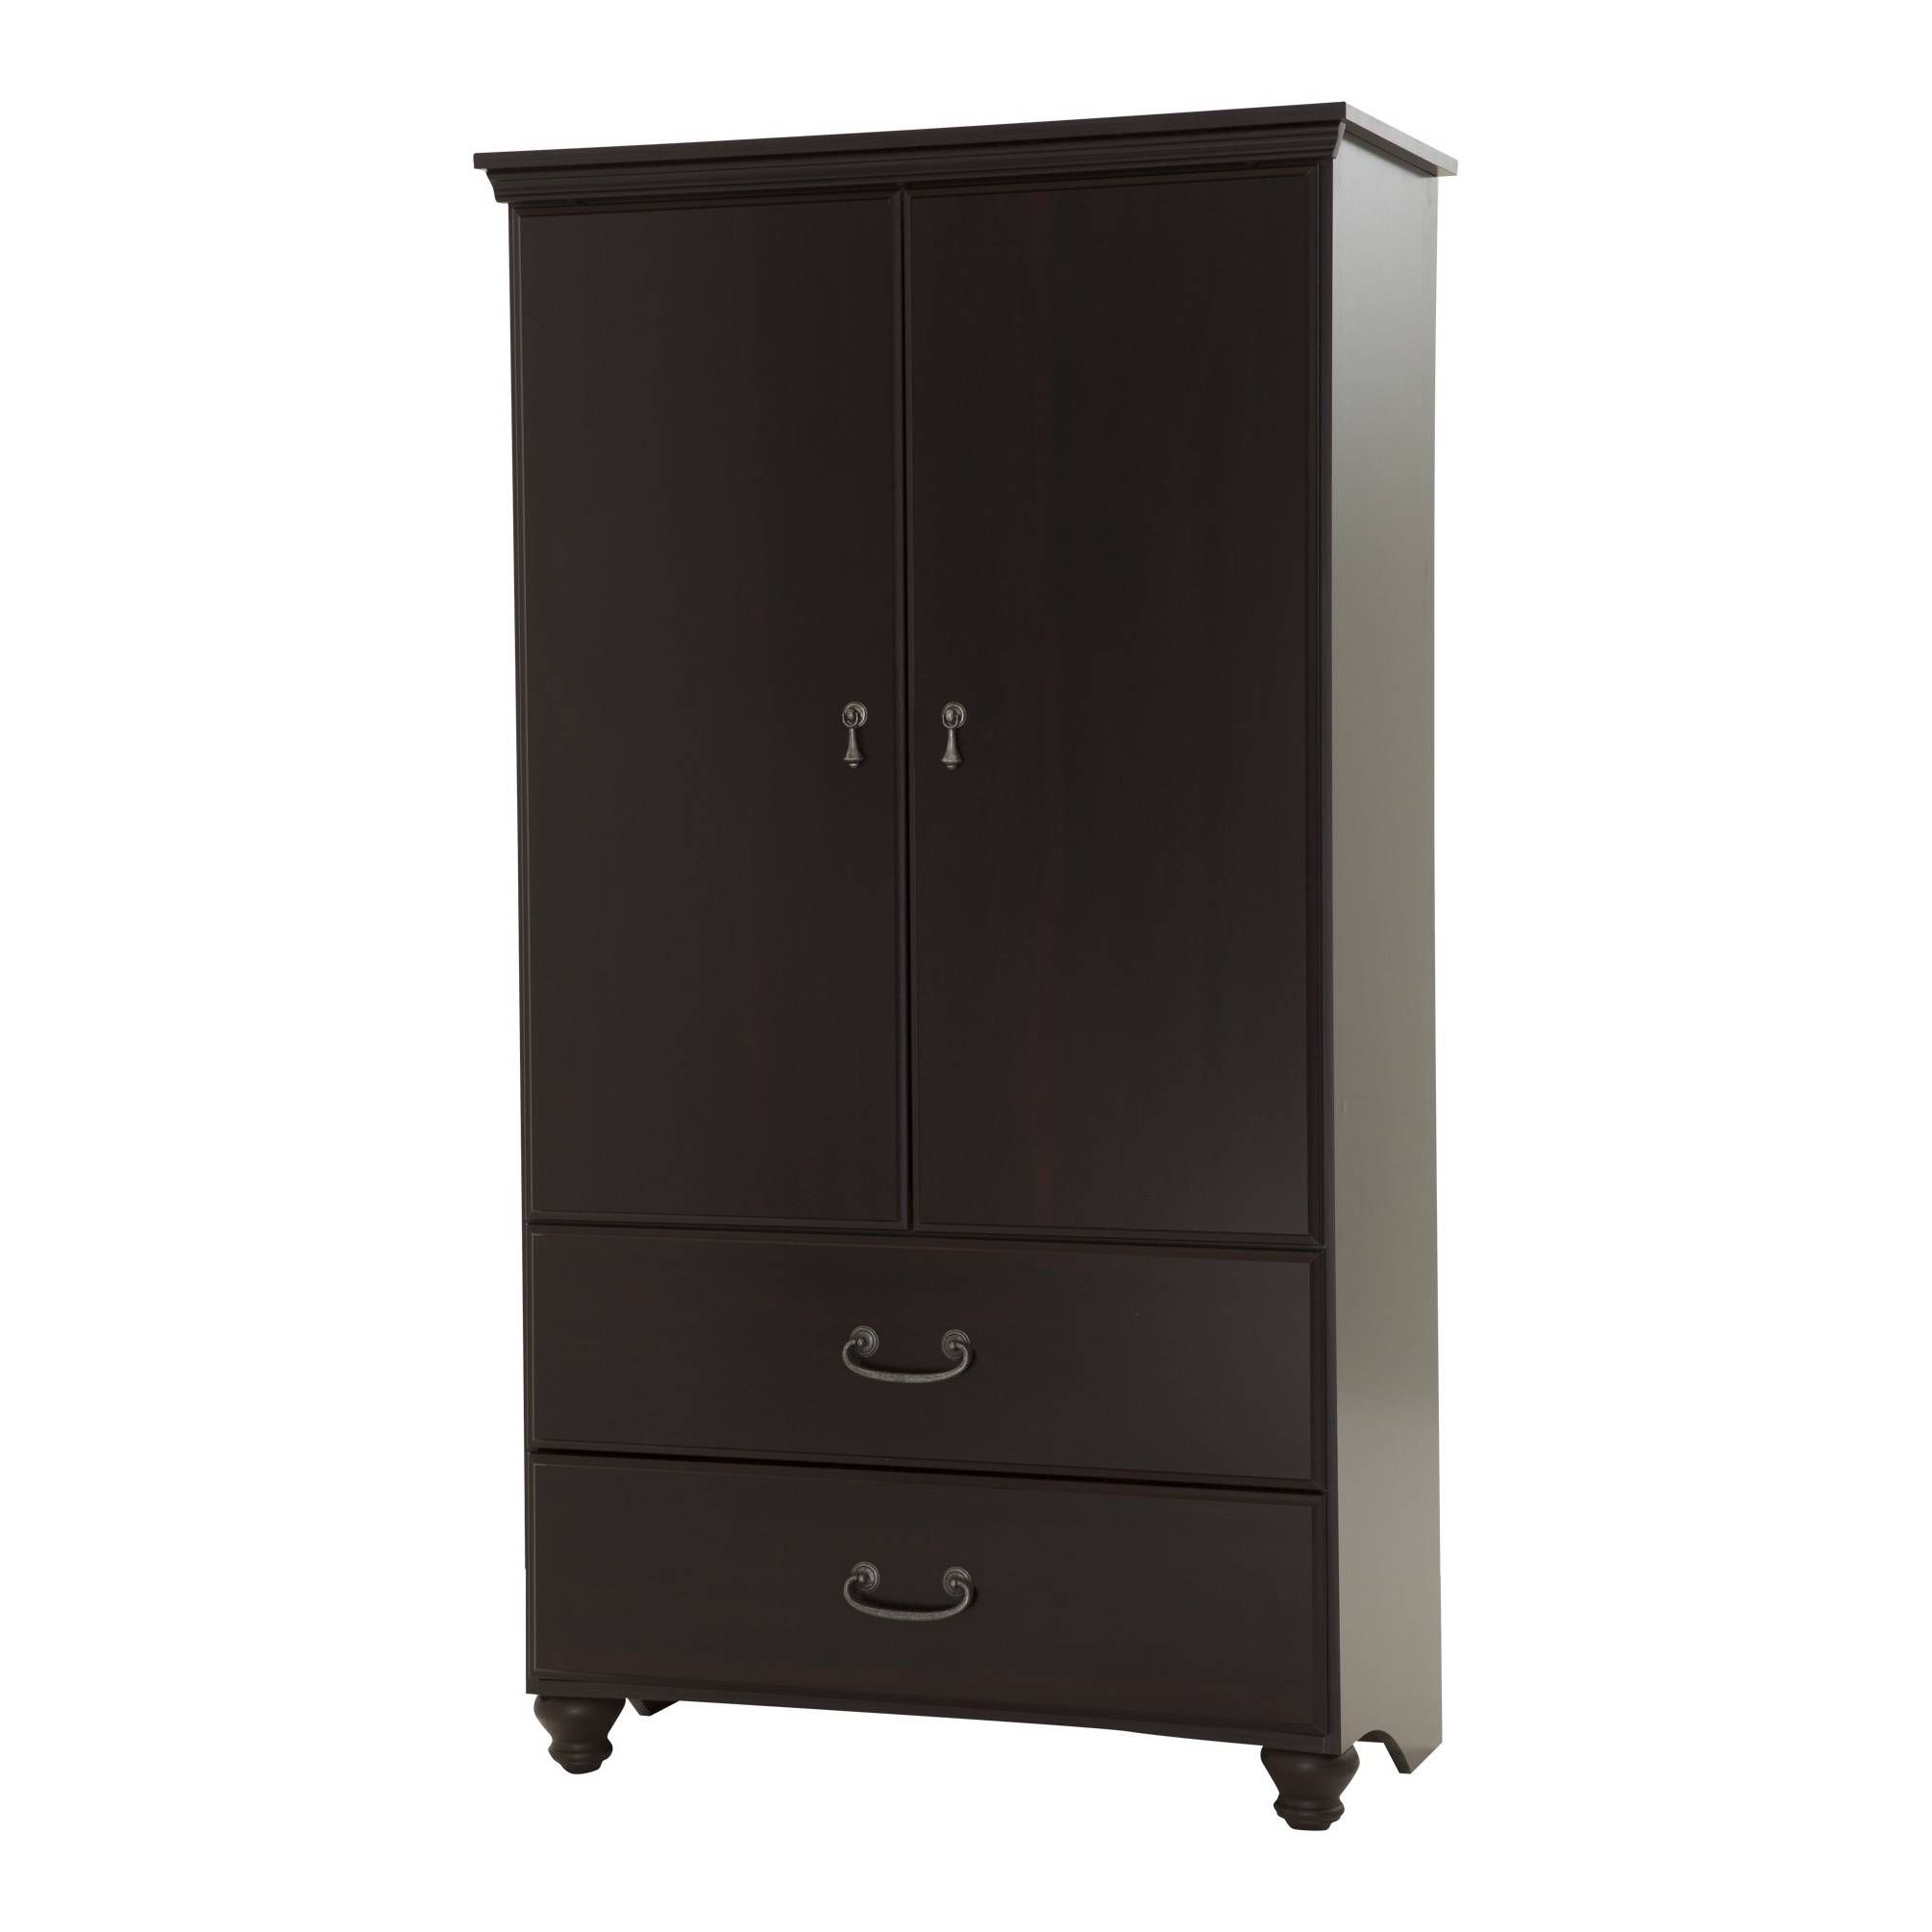 Armoire : Black Armoire Wardrobe Noble Armoire Black Wood Wardrobe Intended For Black French Wardrobes (Photo 9 of 15)